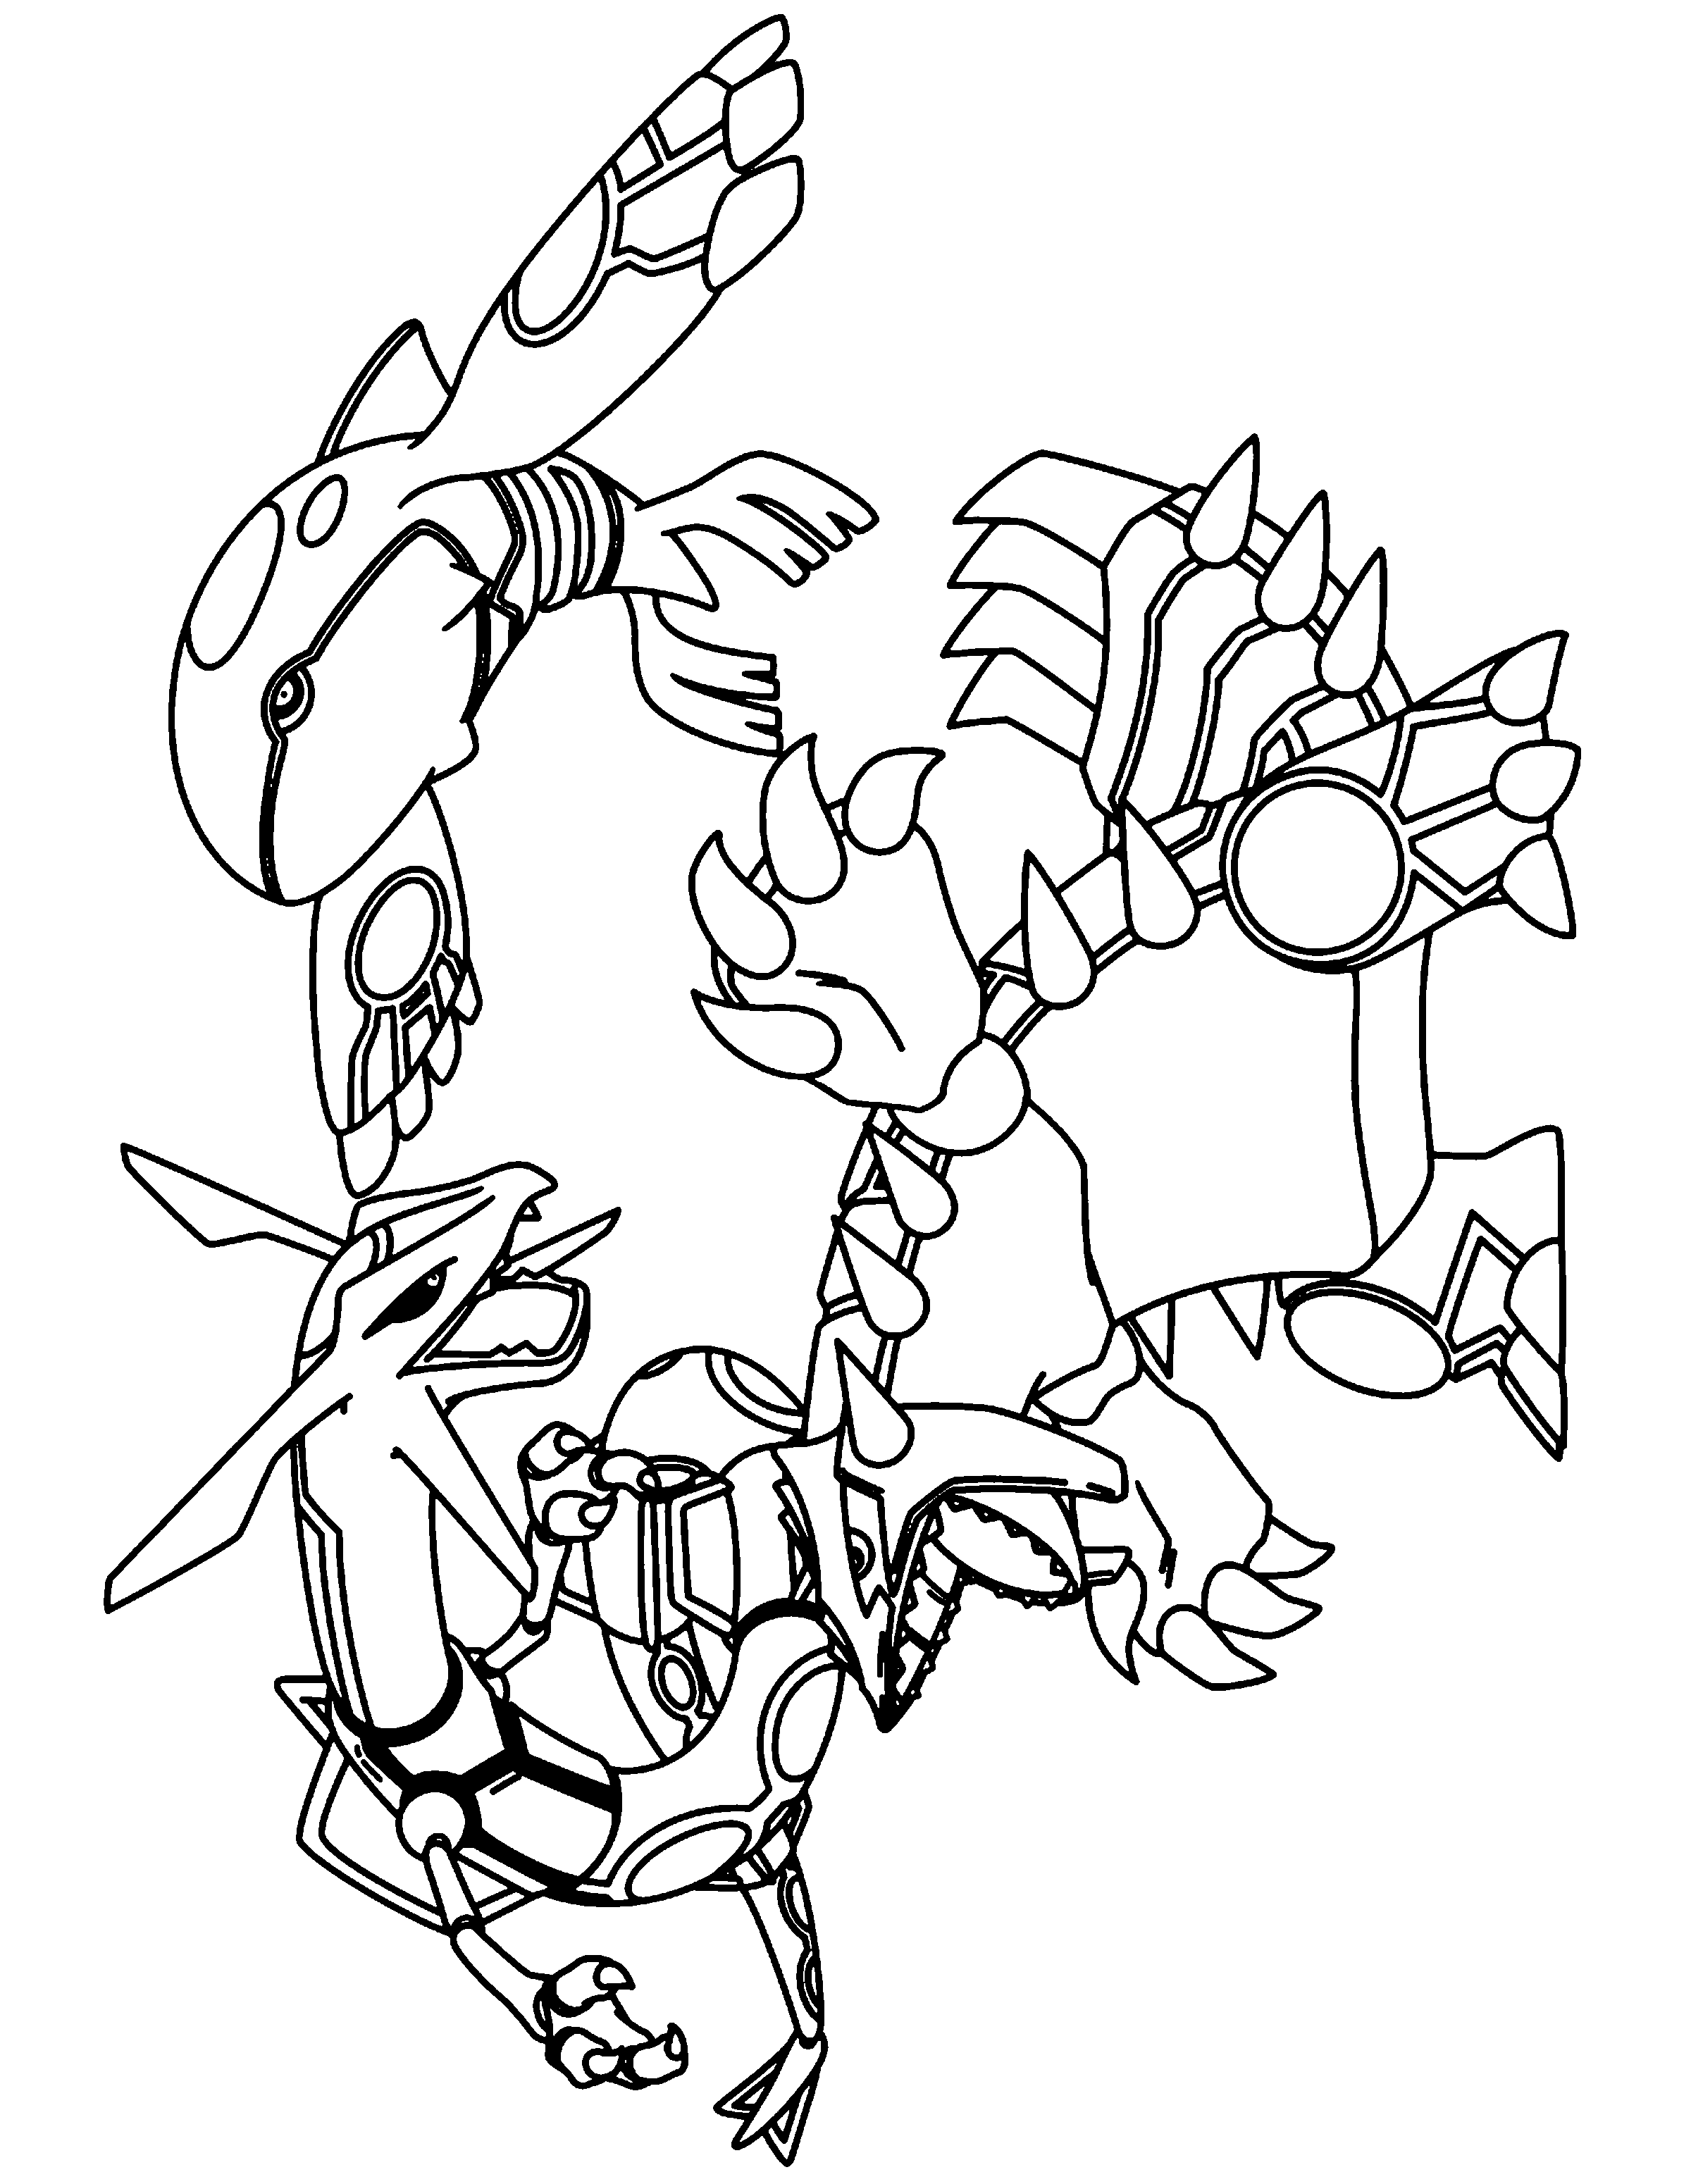 568 Unicorn Rayquaza Coloring Page with Animal character